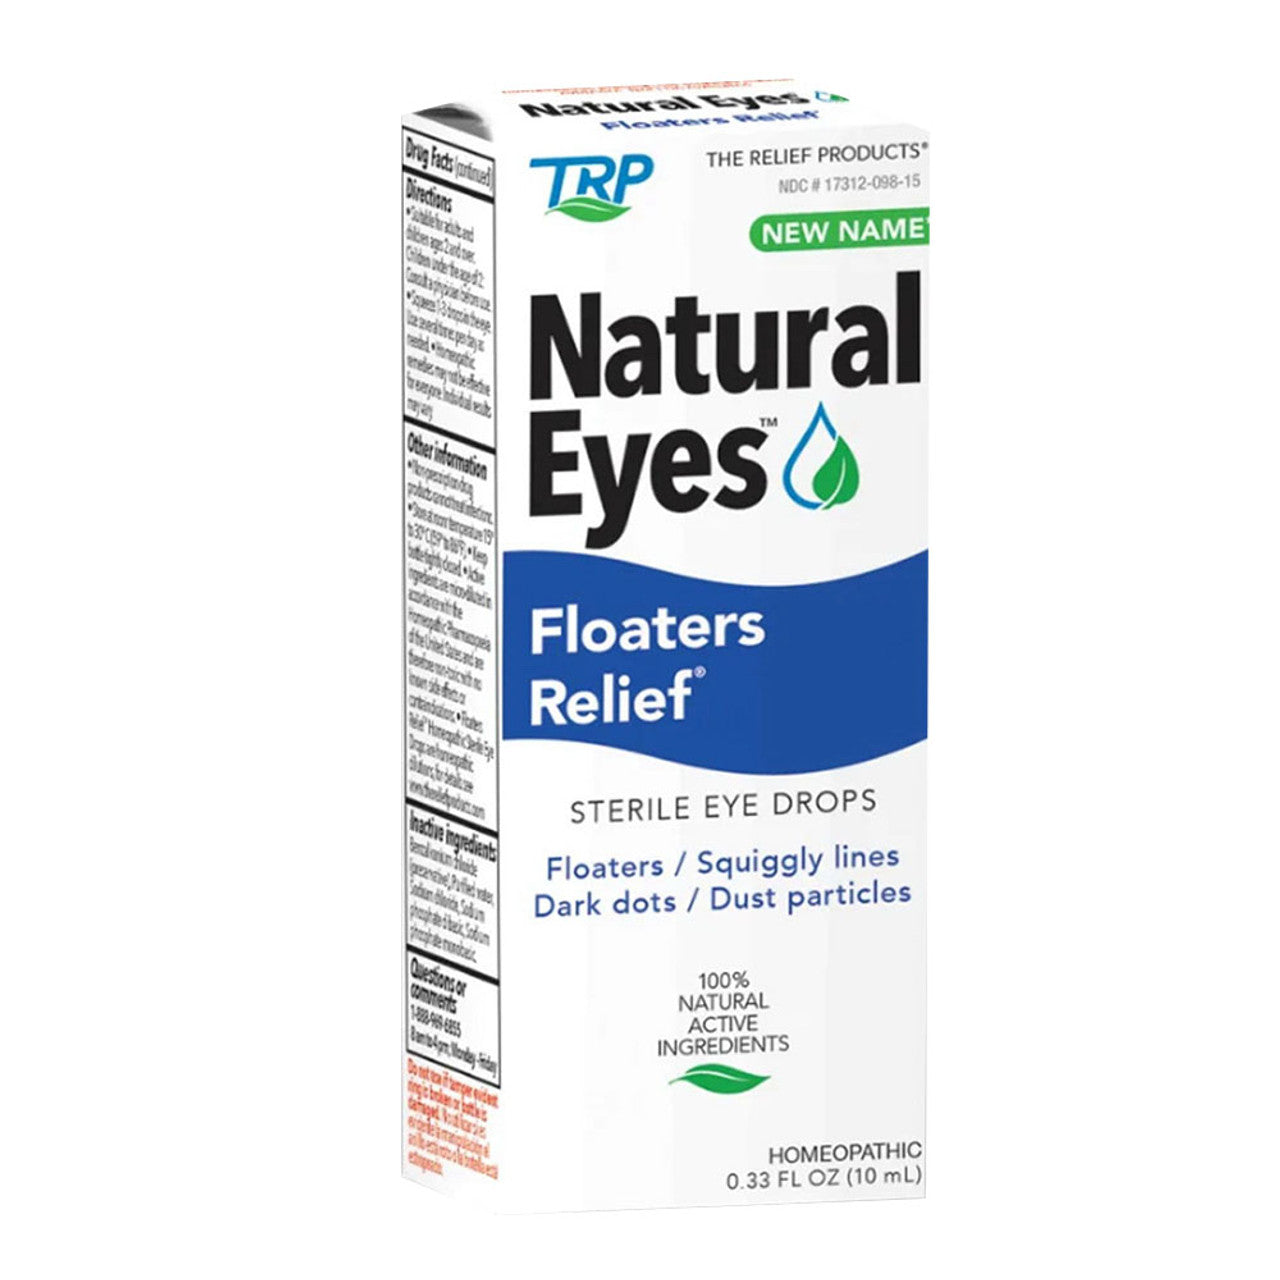 Trp Natural Eyes Floaters Relief Eye Drops, 0.33 Oz